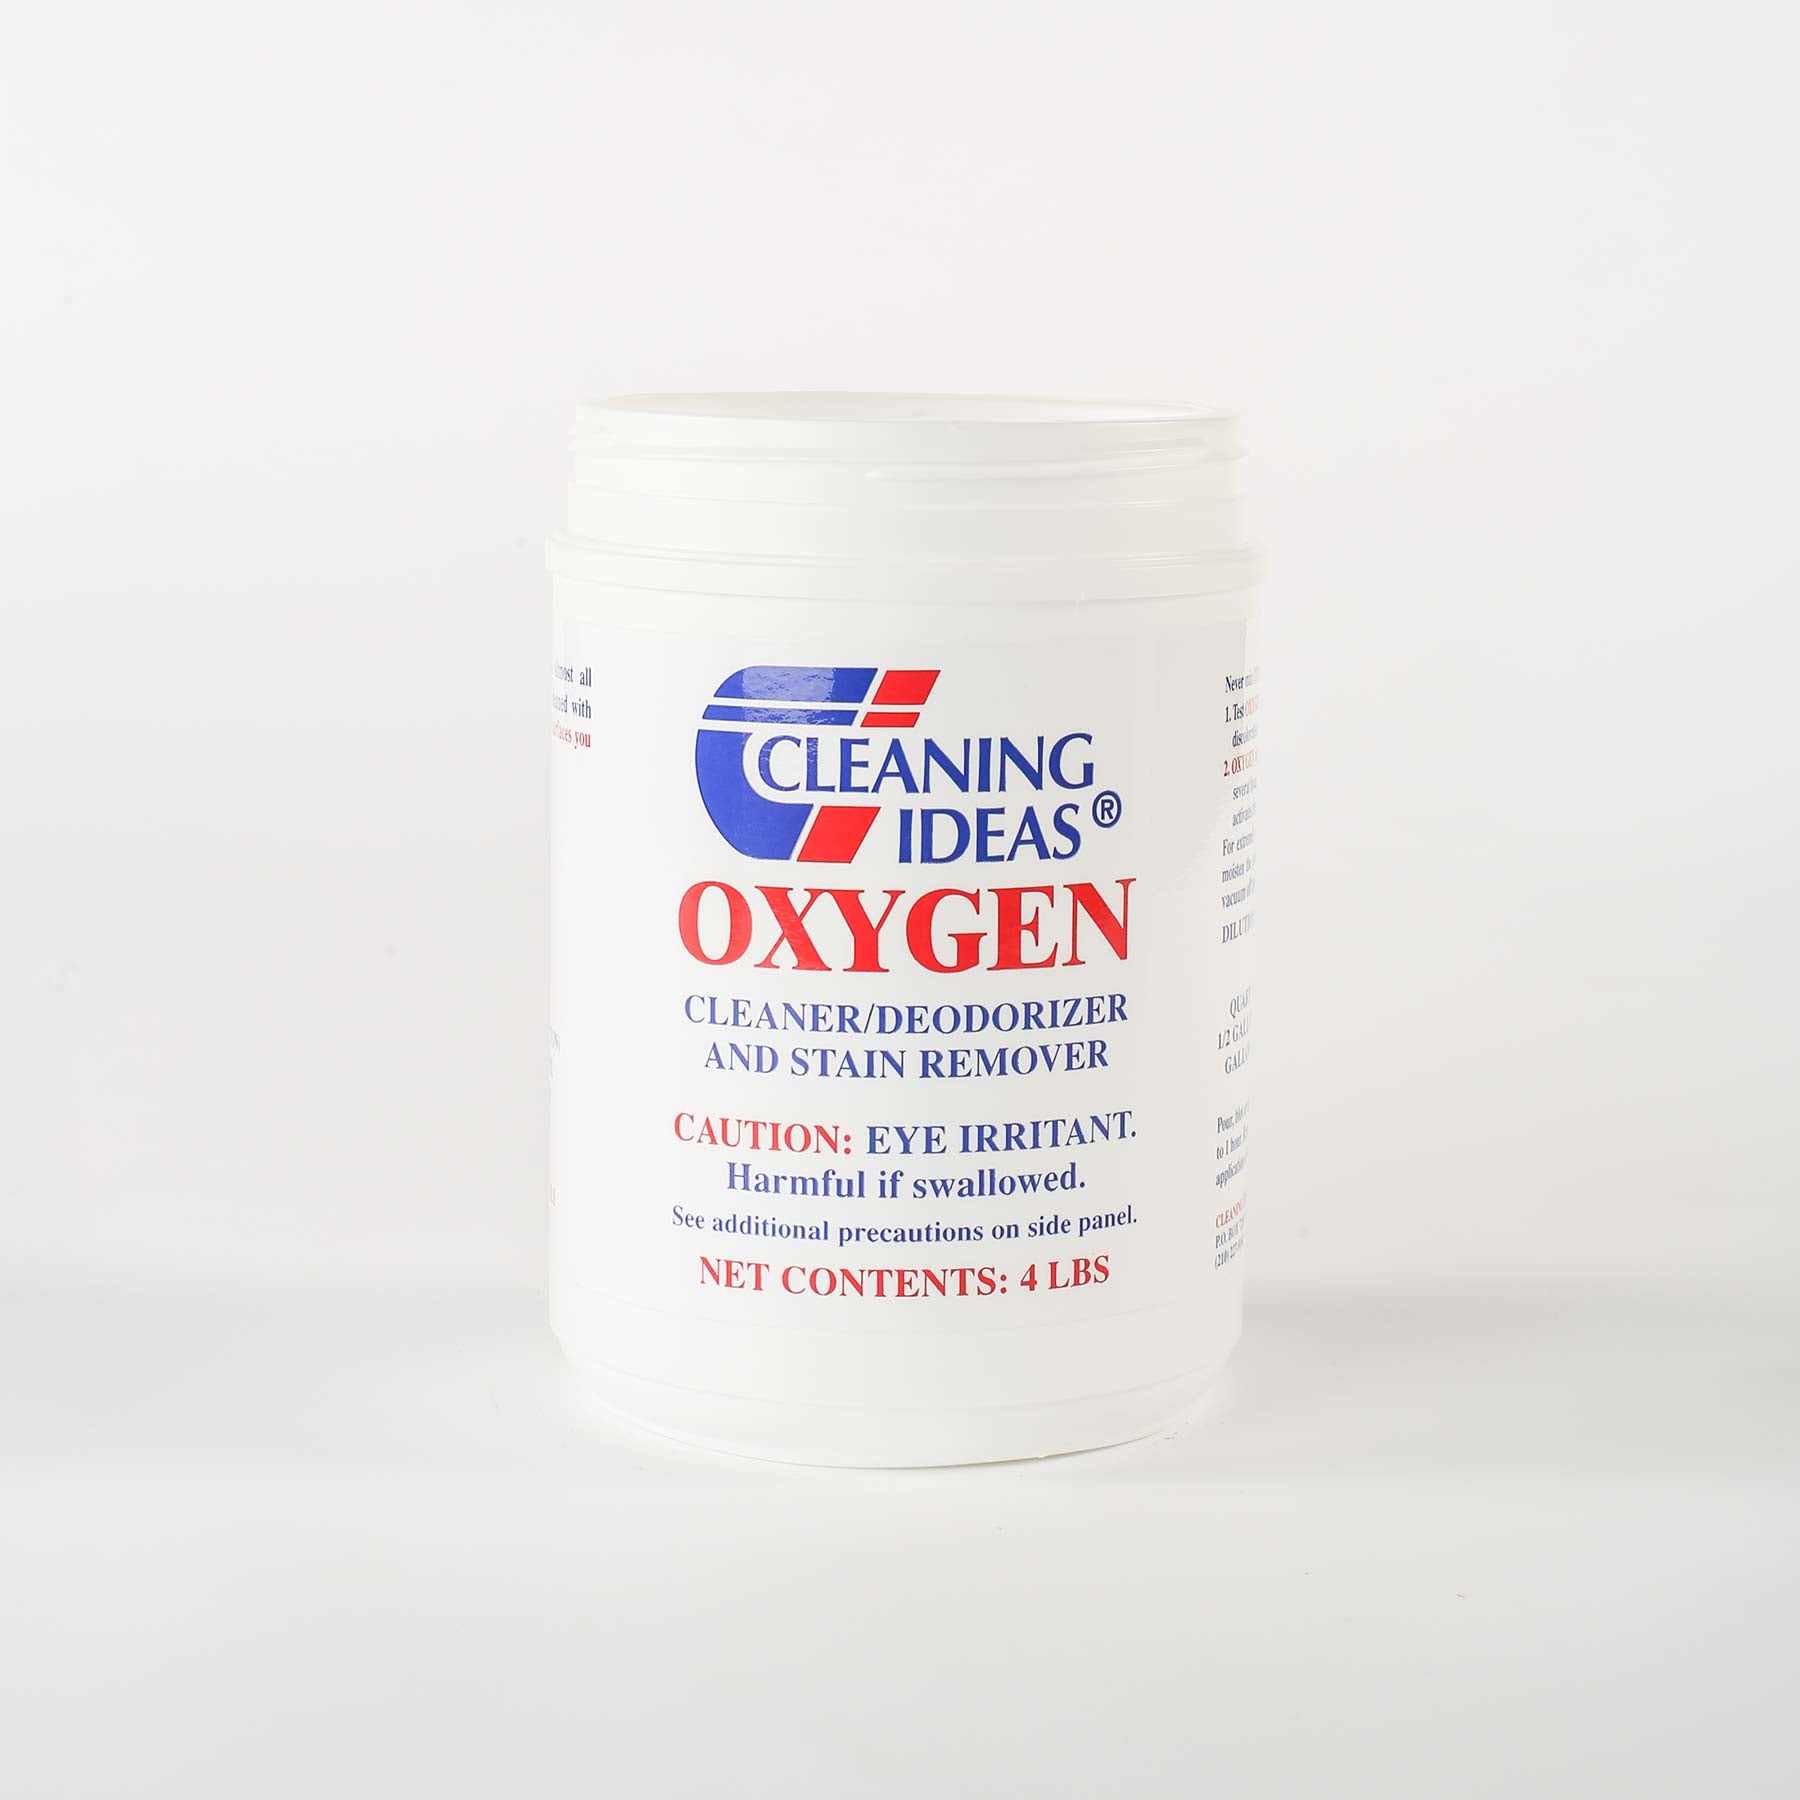 Oxygen Cleaner / Deodorizer and Stain Remover